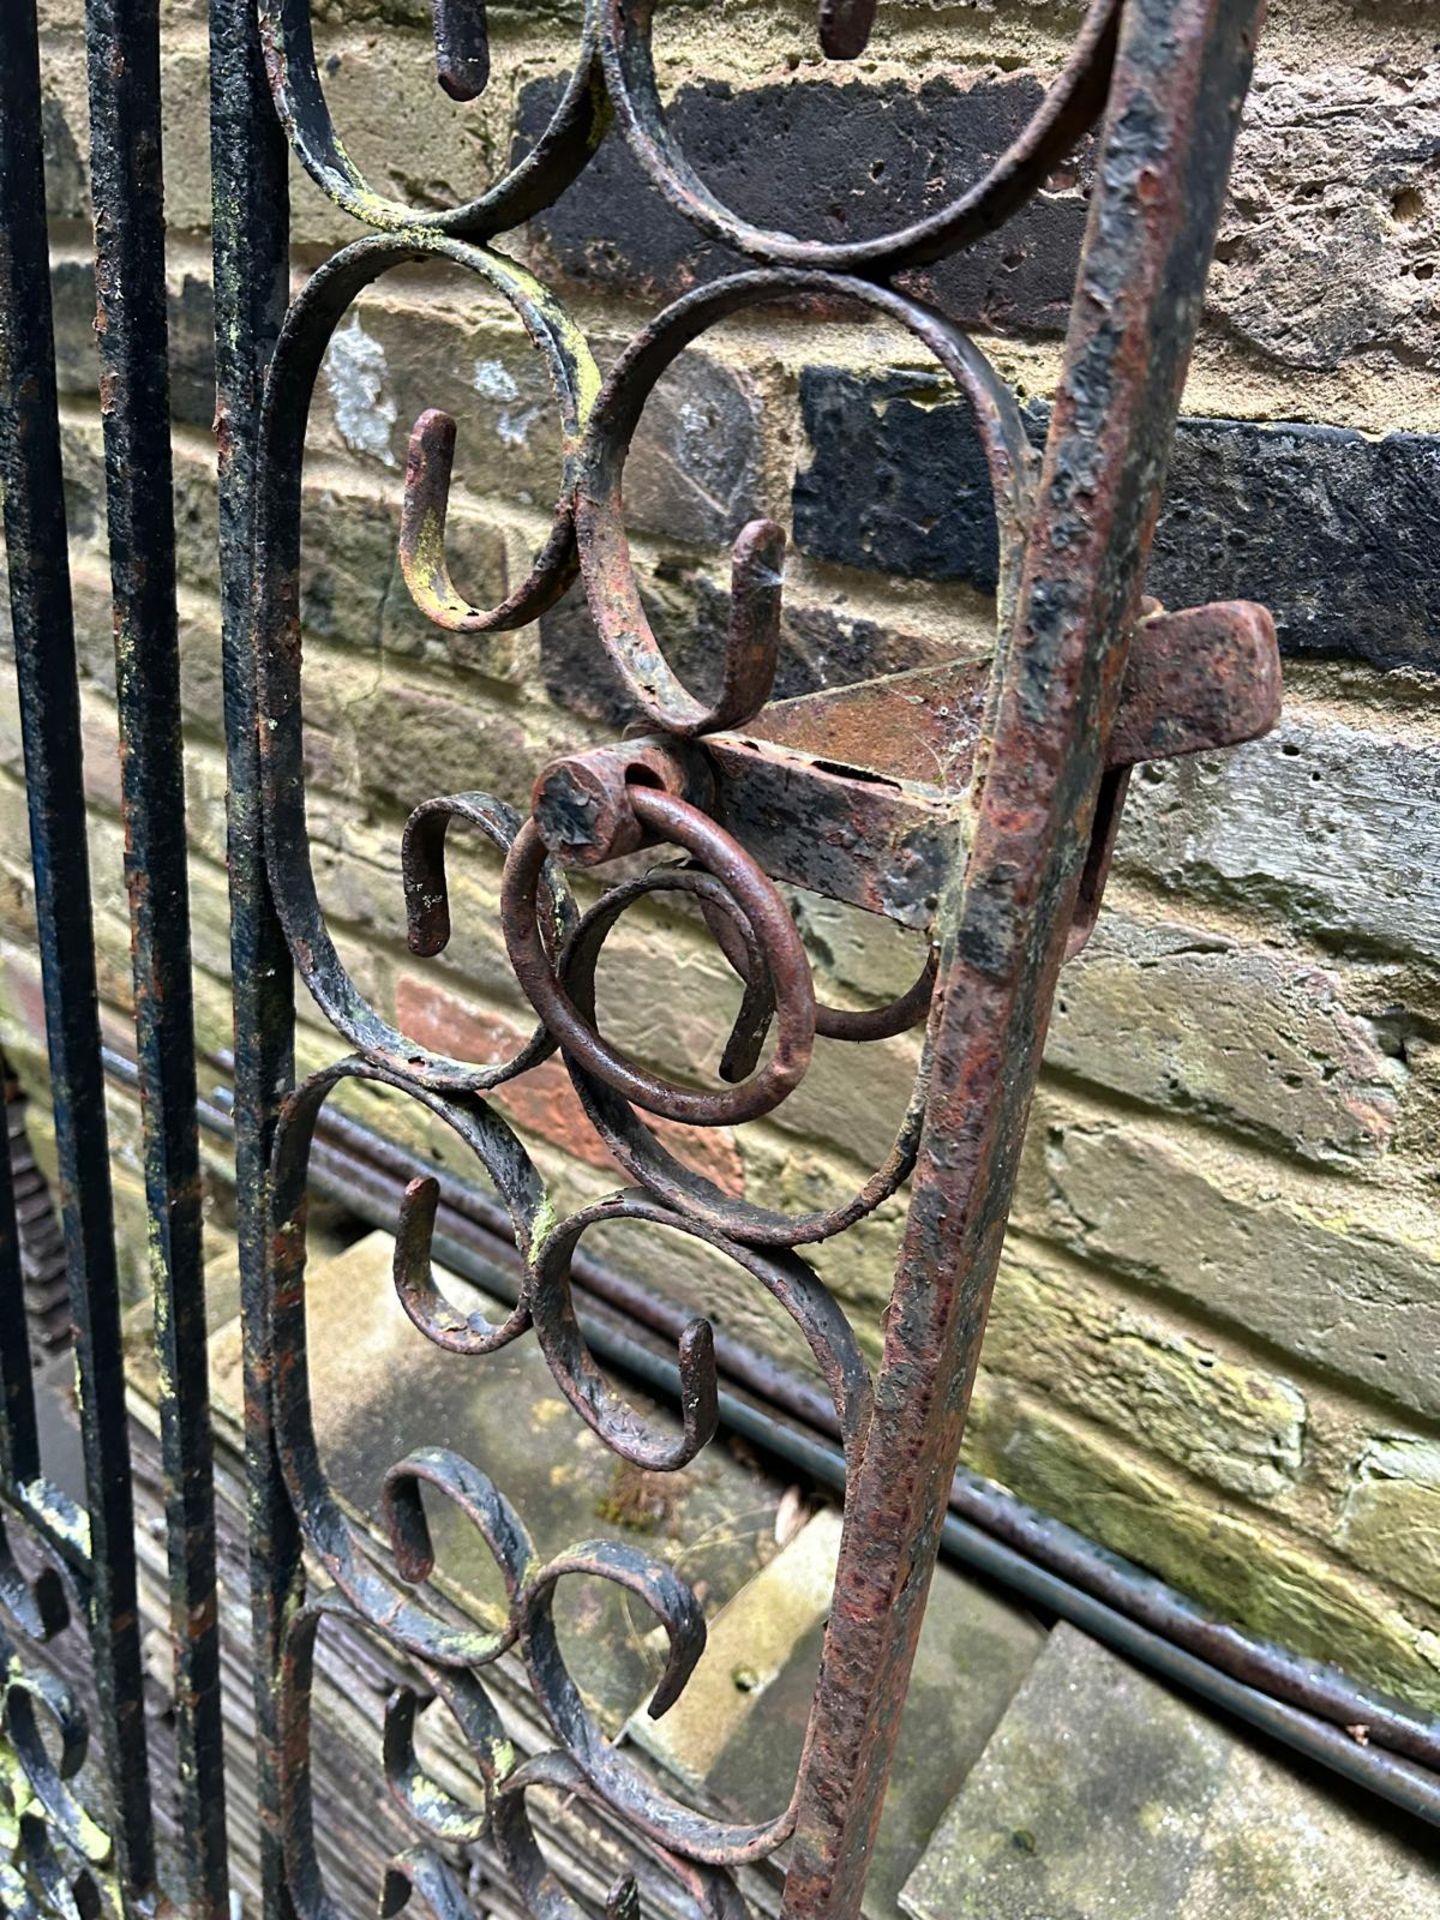 Black Painted Wrought Iron Side Gate Approximately 180 x 91cm - Image 3 of 3